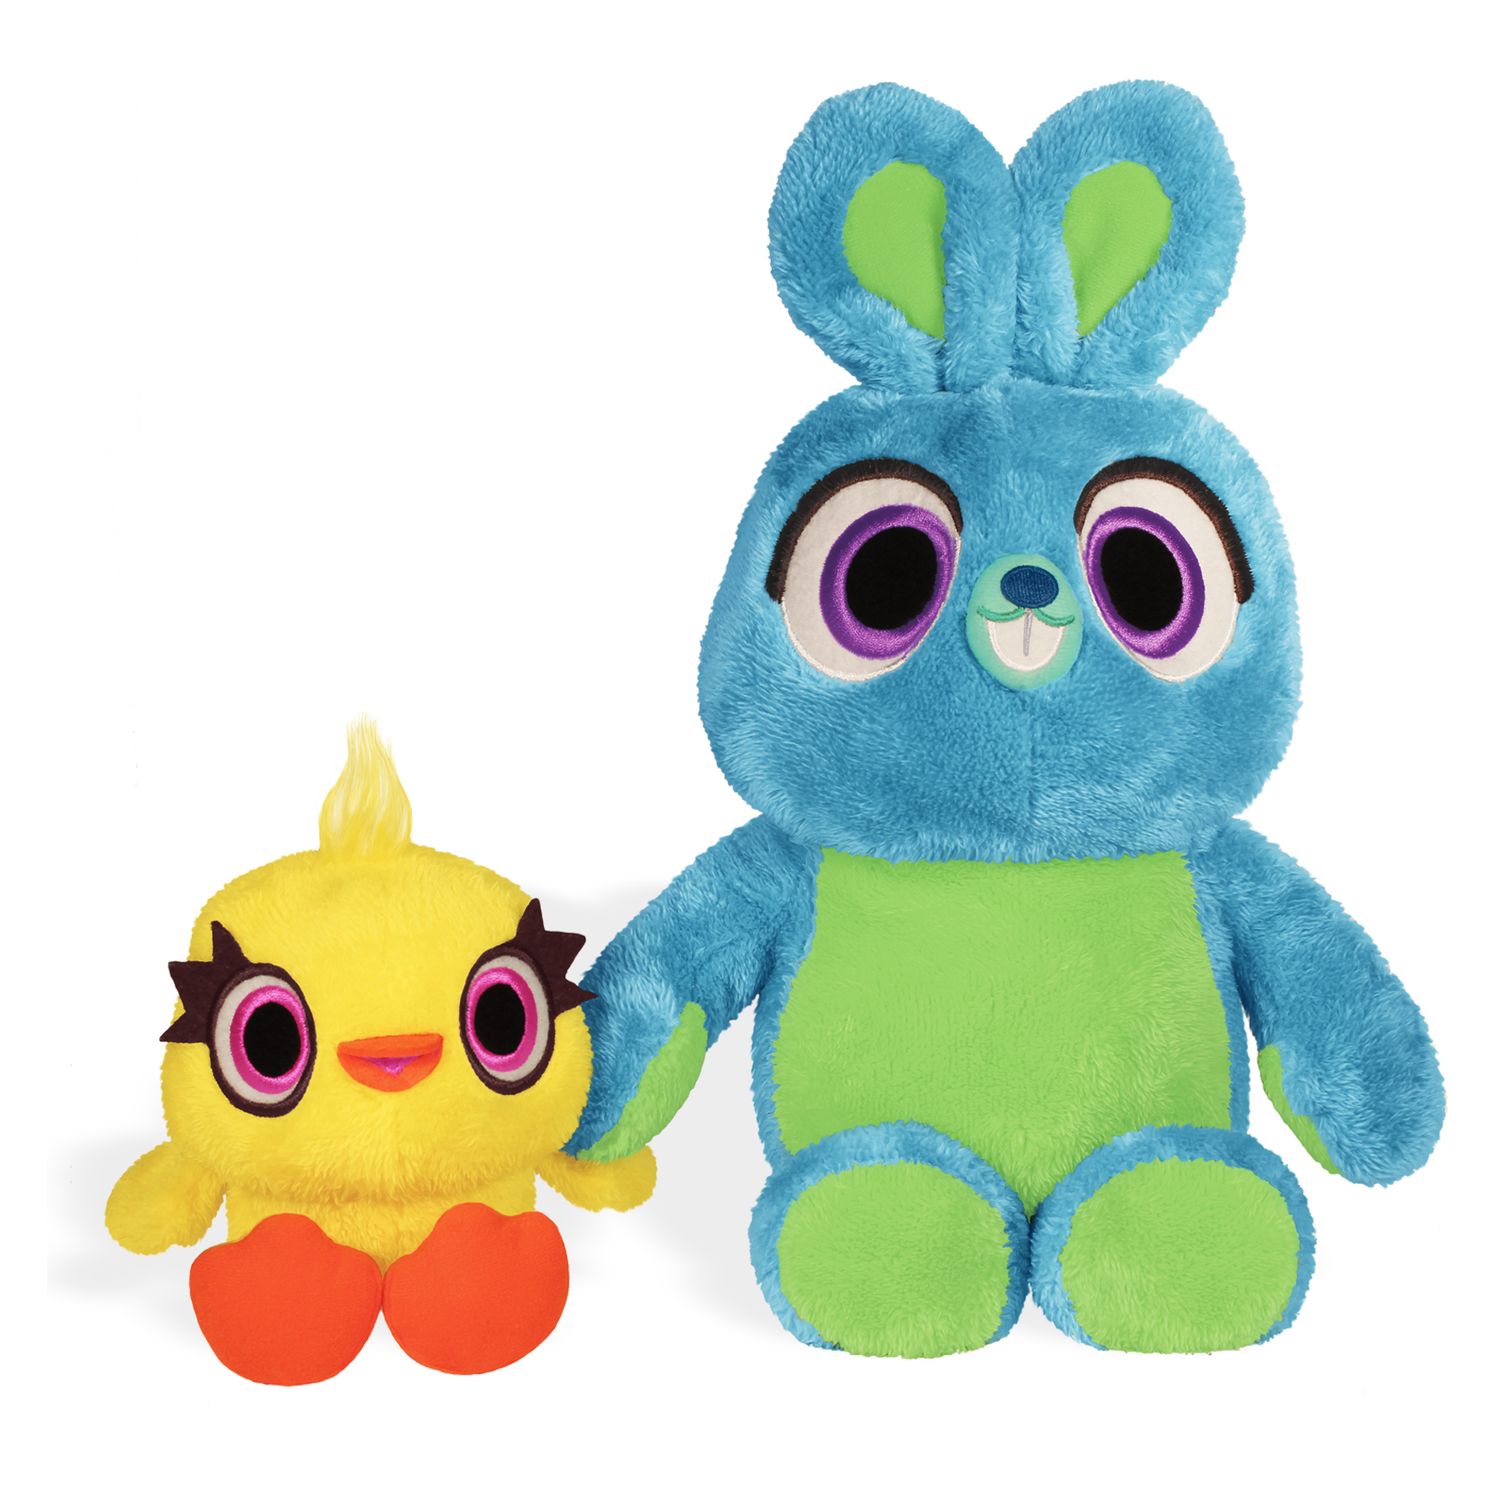 toy story 4 plush characters